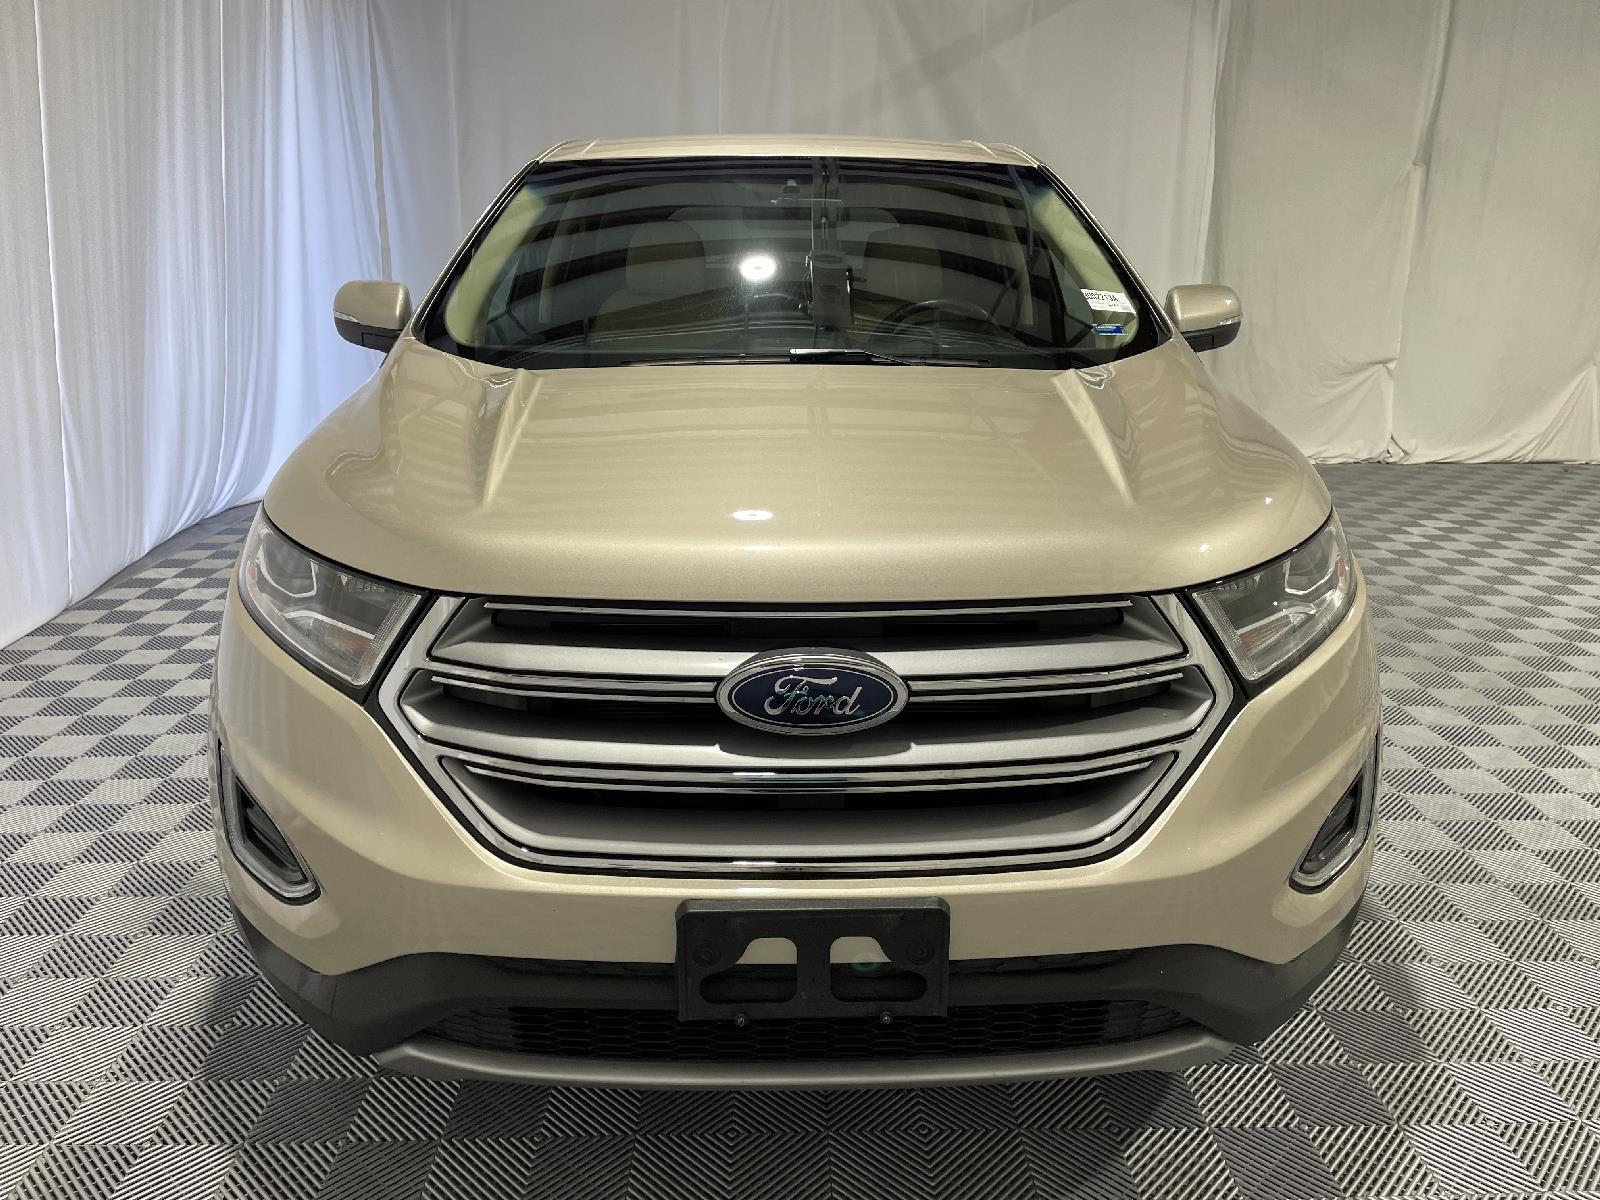 Used 2018 Ford Edge SEL SUV for sale in St Joseph MO